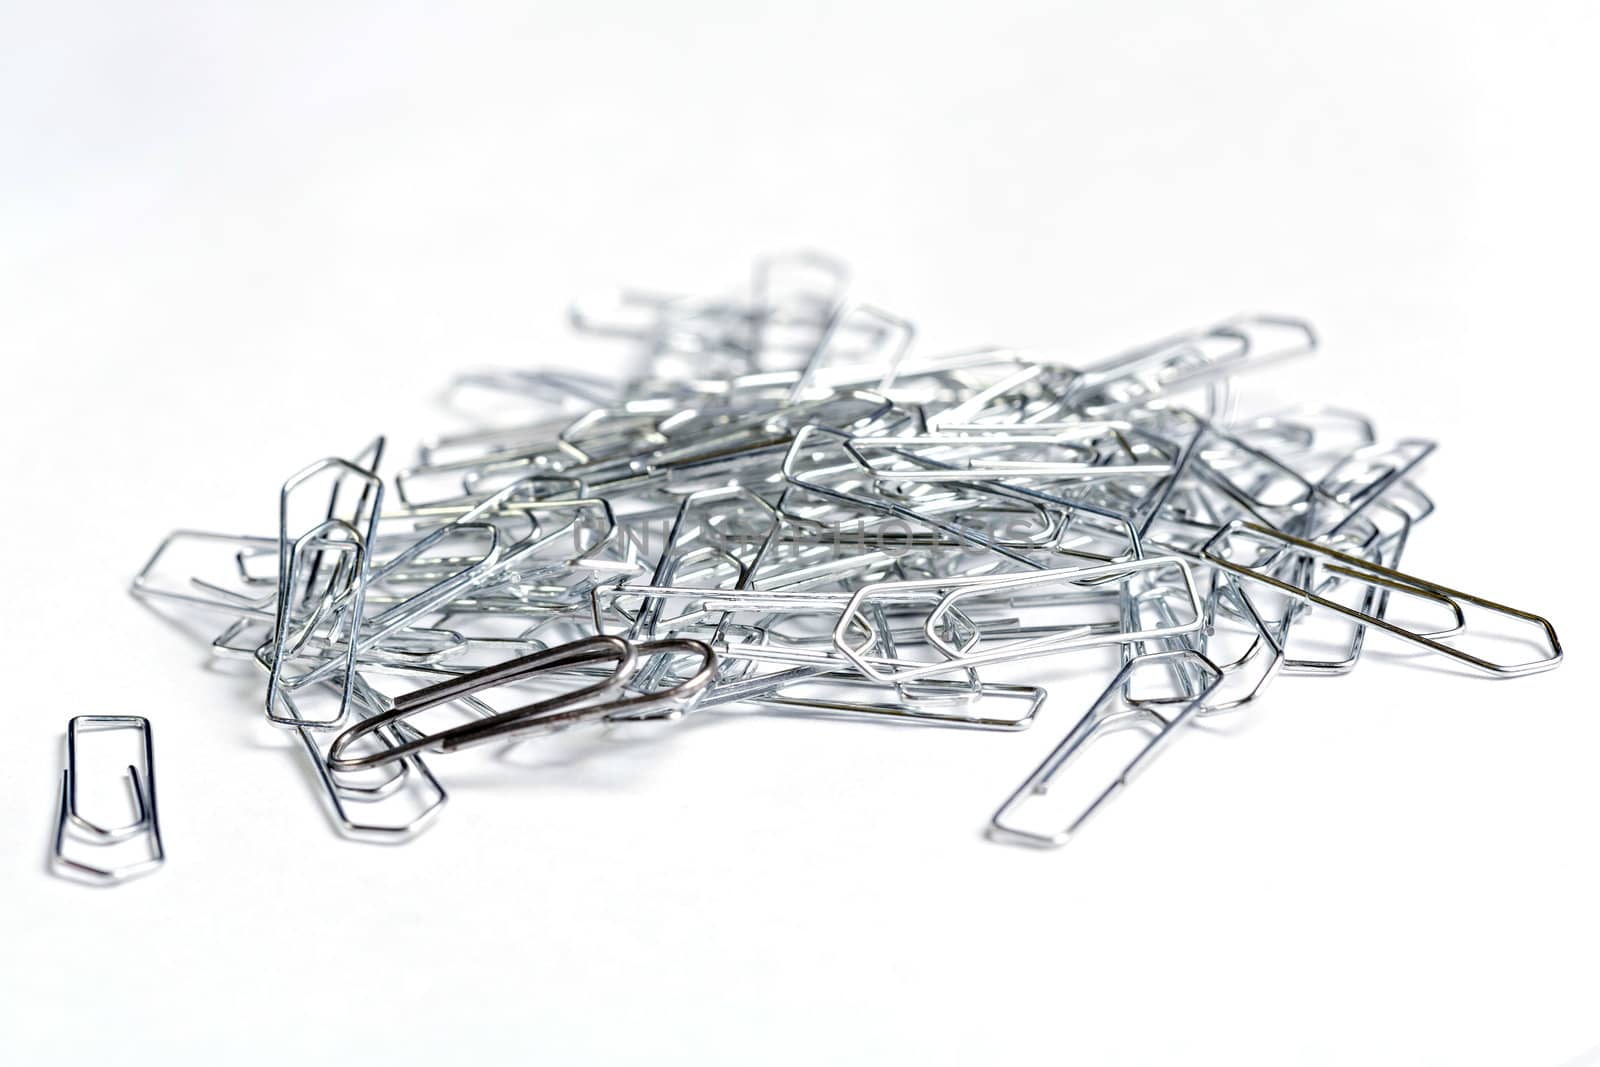 Bunch of metallic paper-clips on white background